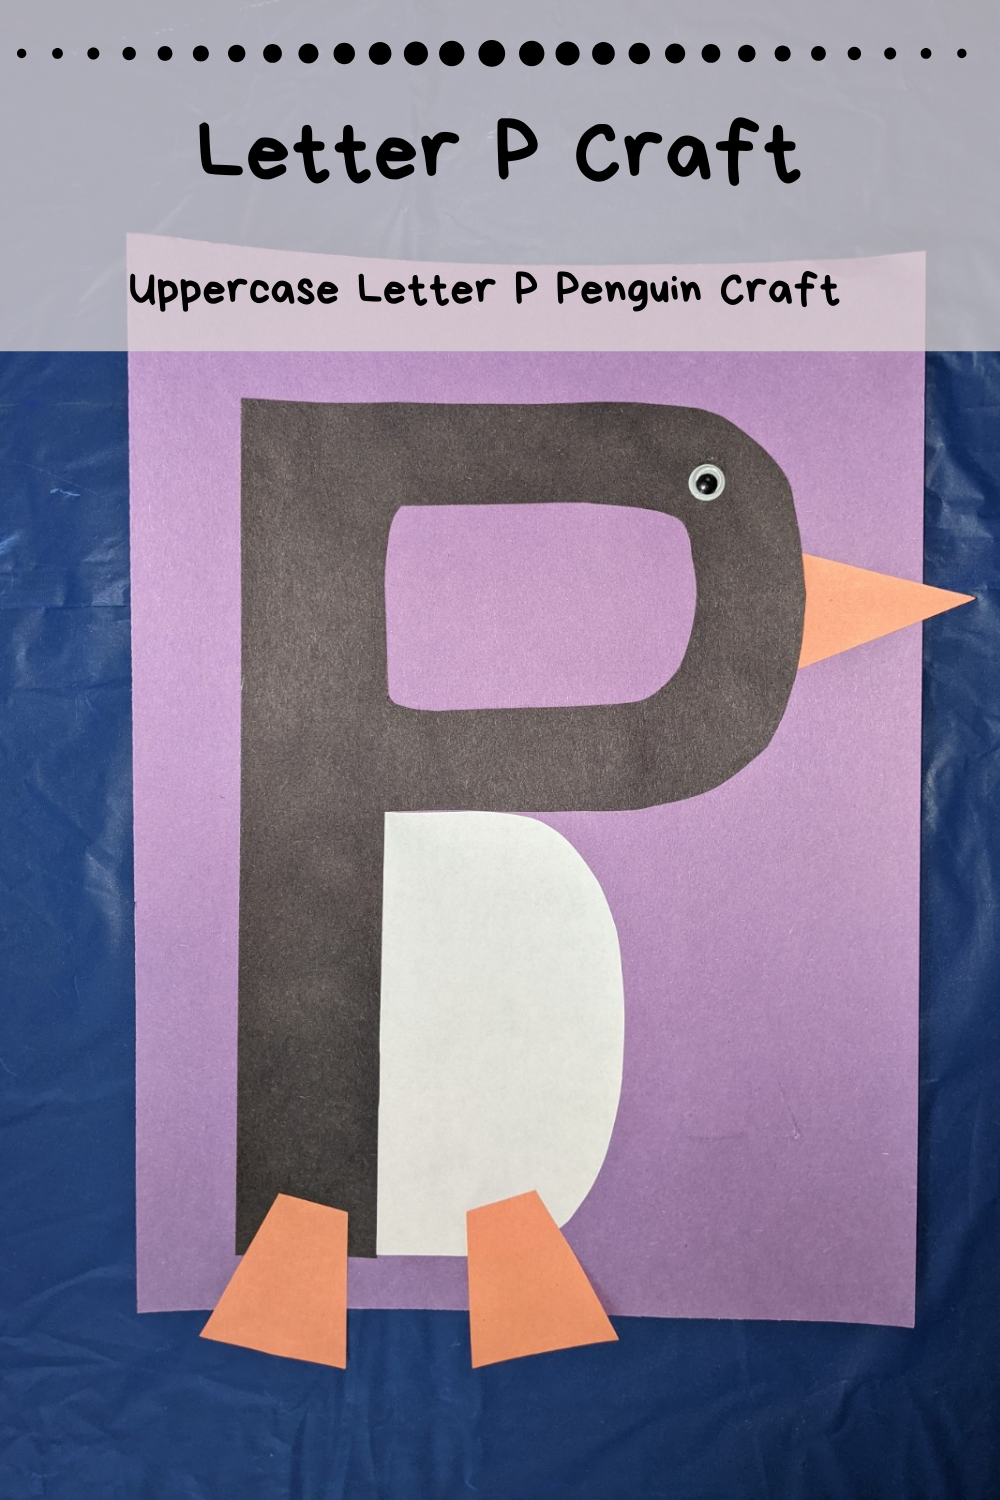 Uppercase Letter P Craft for Preschool - Home With Hollie